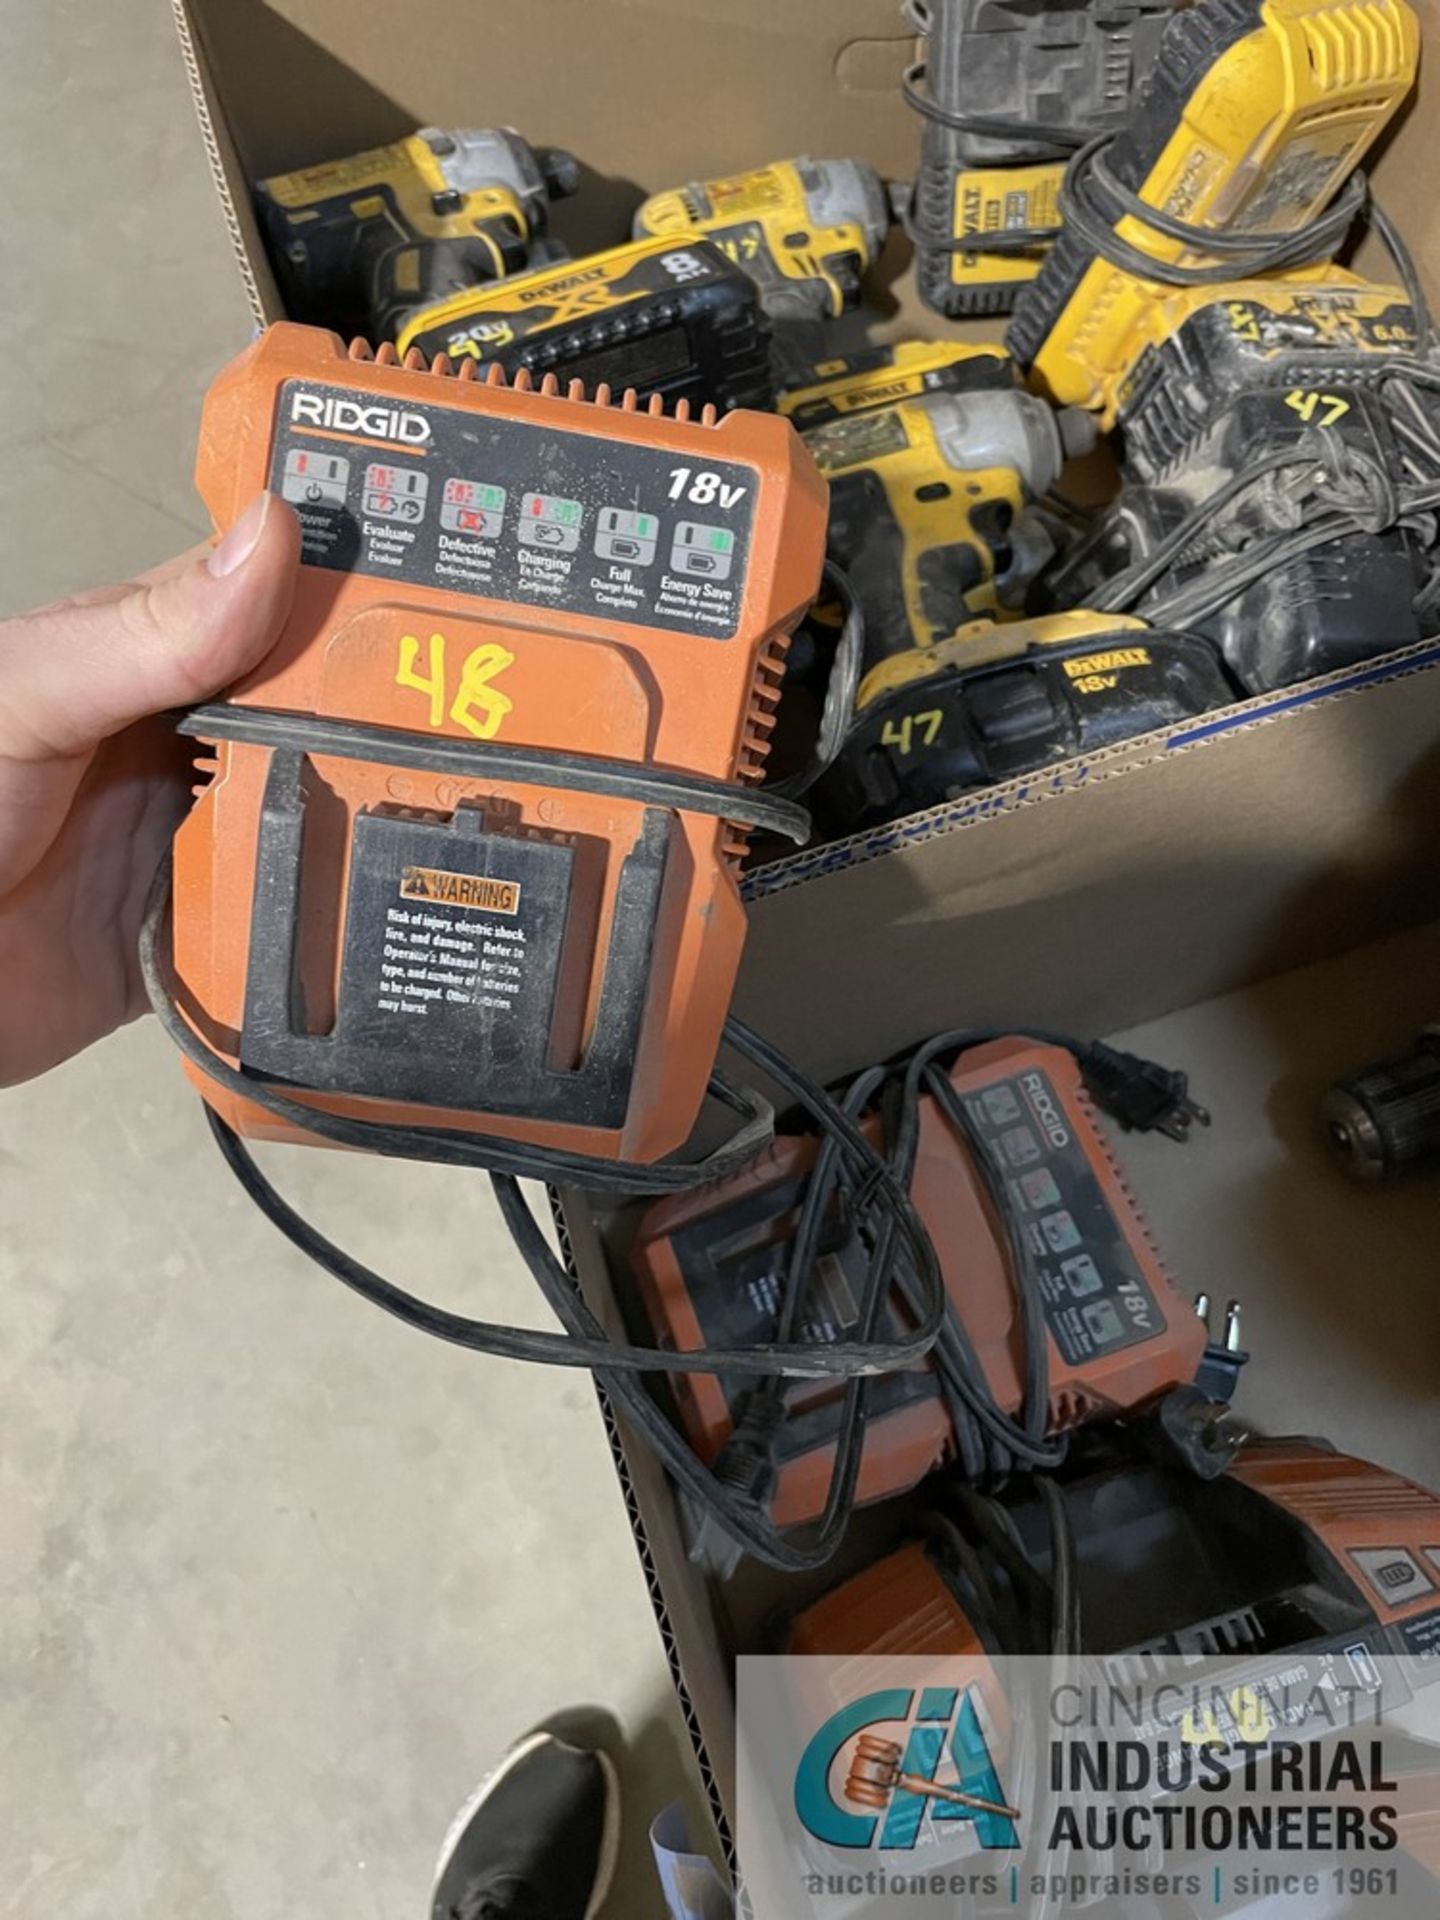 MISCELLANEOUS RIDGID CORDLESS POWERTOOLS WITH (5) CHARGERS - Image 3 of 6